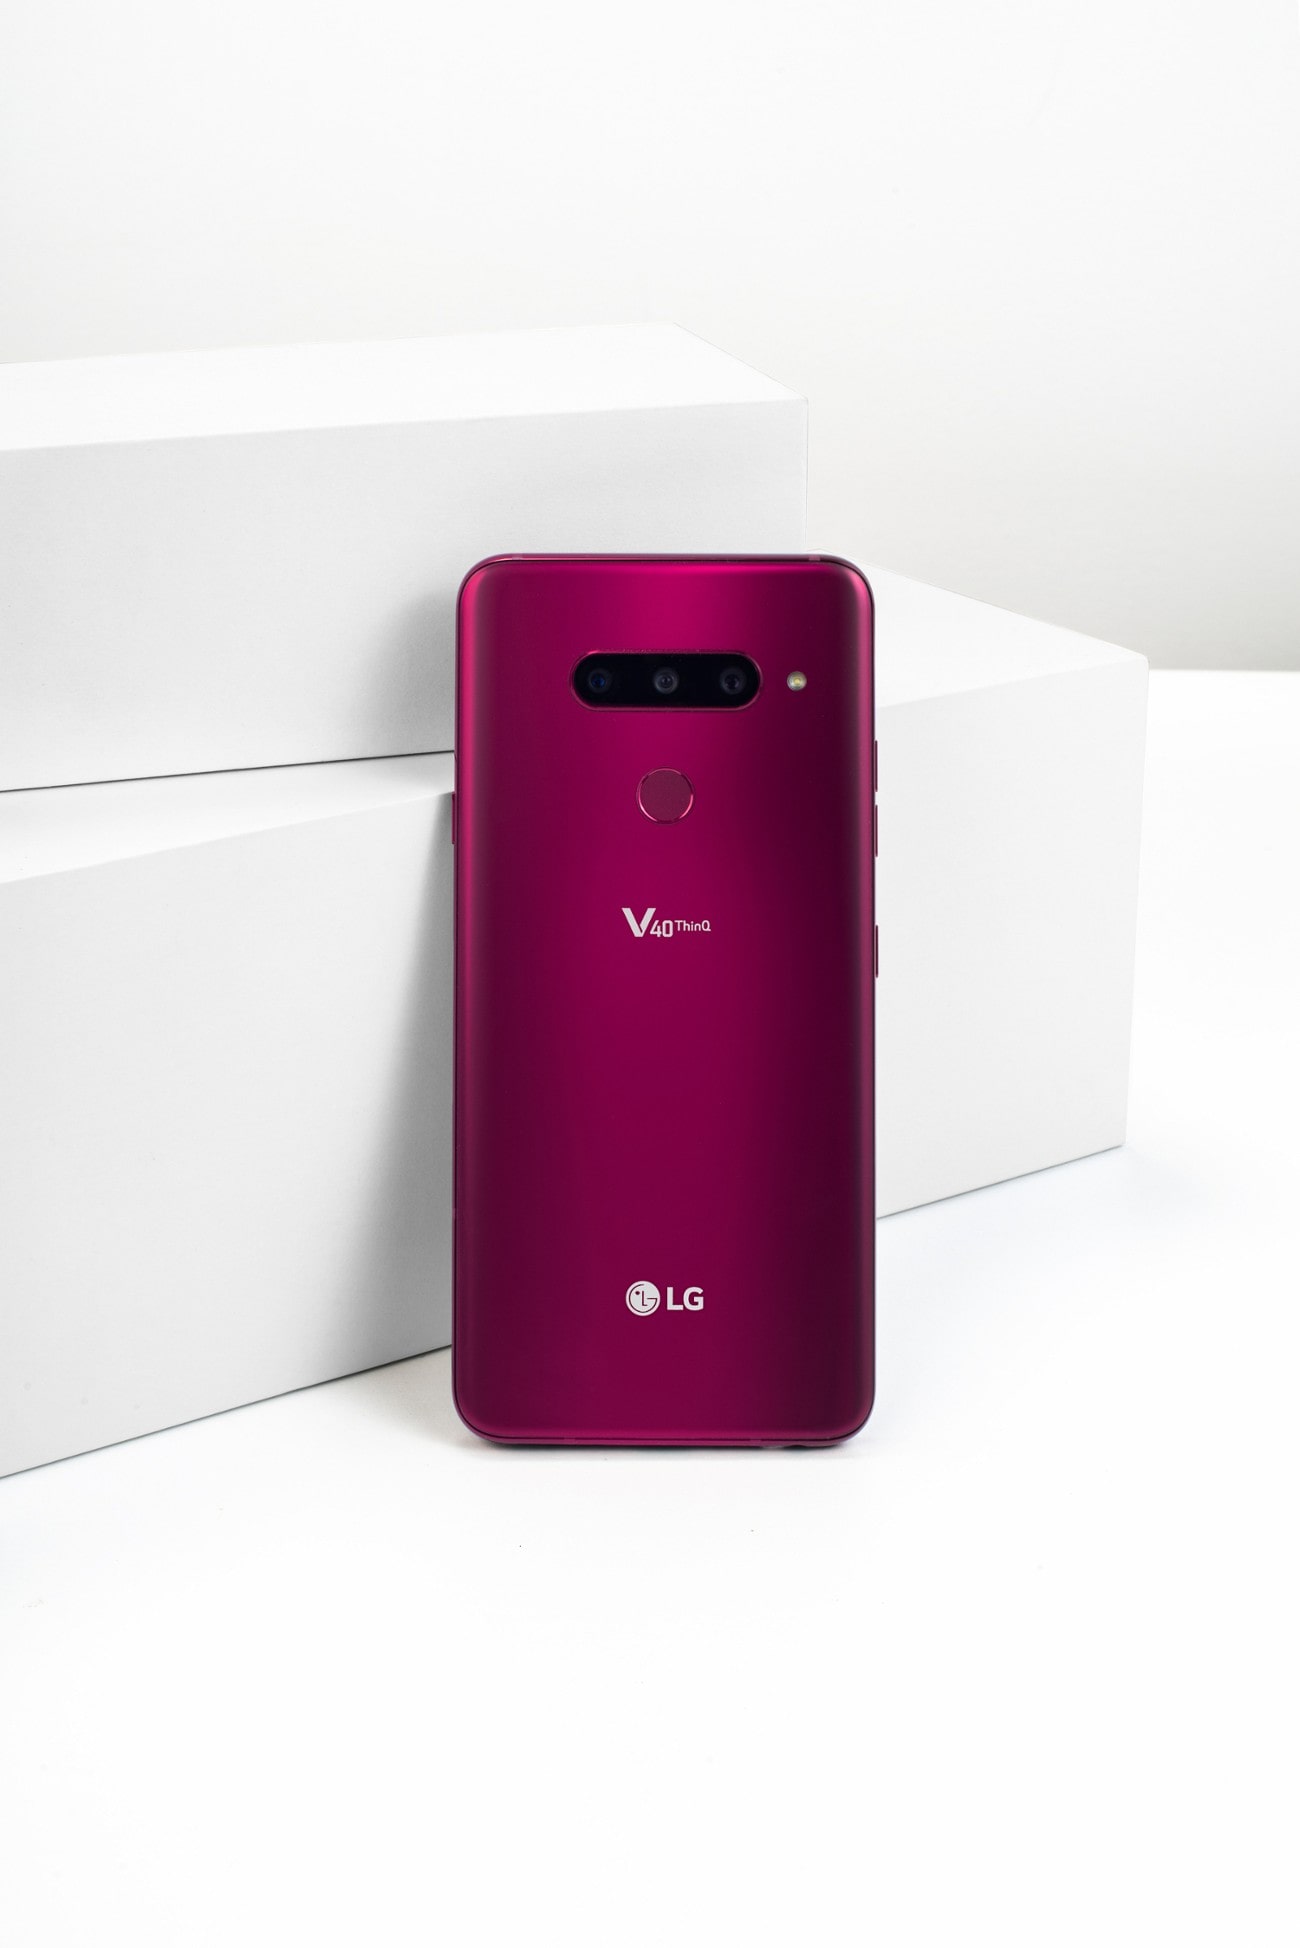 LG DELIVERS ULTIMATE FIVE CAMERA SMARTPHONE WITH LG V40 THINQ | LG Global